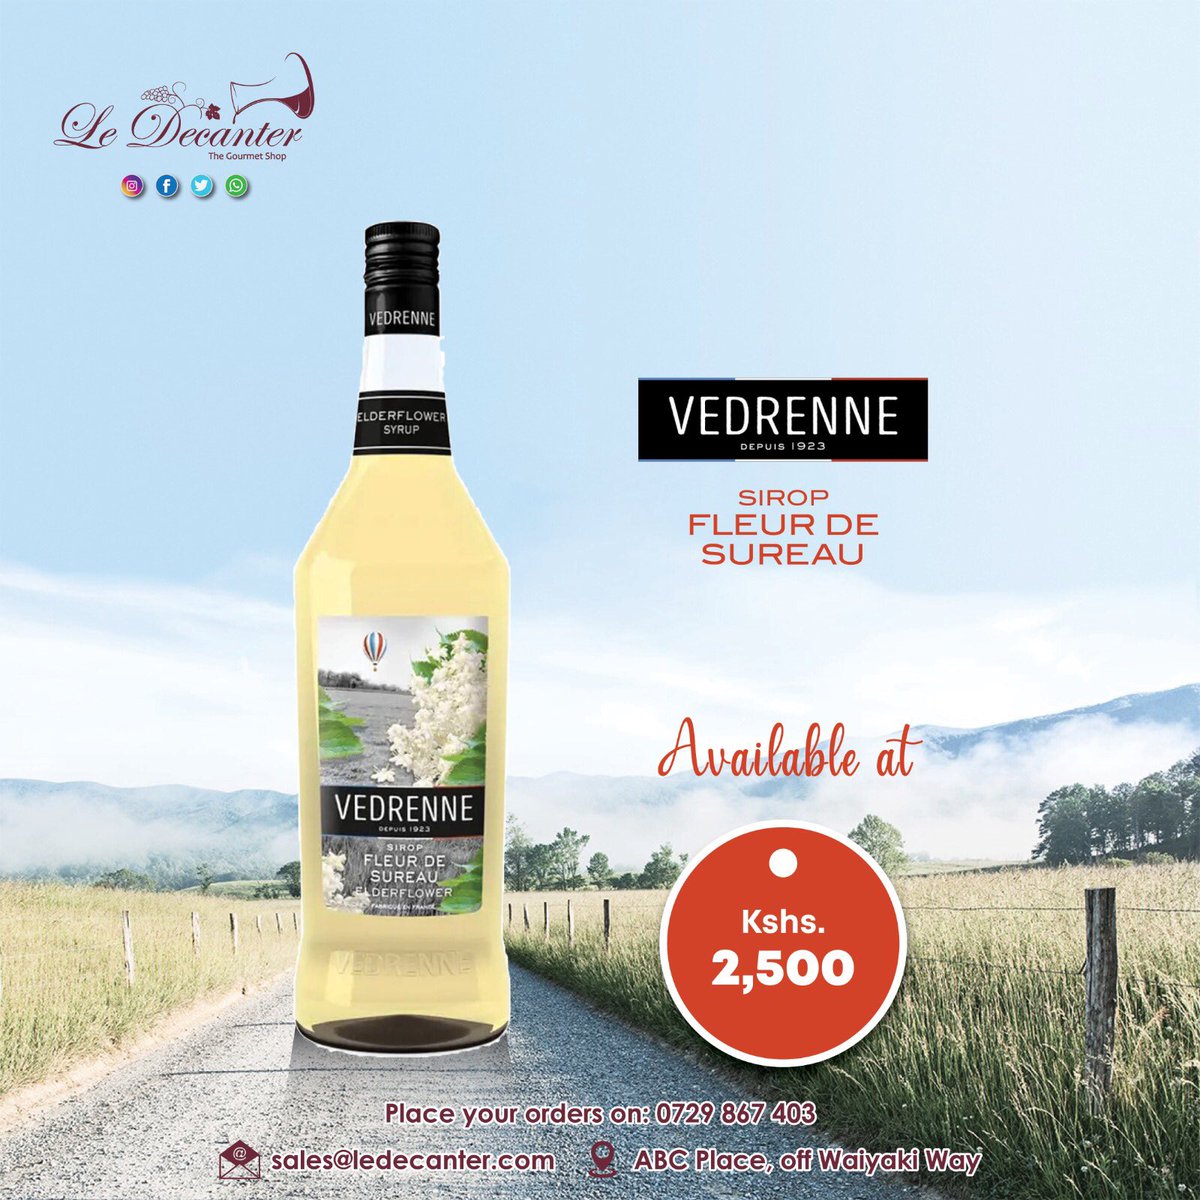 Elderflower syrup is ideal for making an elderflower cordial, an elderflower cocktail, baked goods, and more! Available at only 2,500/= To order kindly call us on 0729867403/email us on sales@ledecanter.com. You can also shop on ledecanter.com #ledecanter #syrups